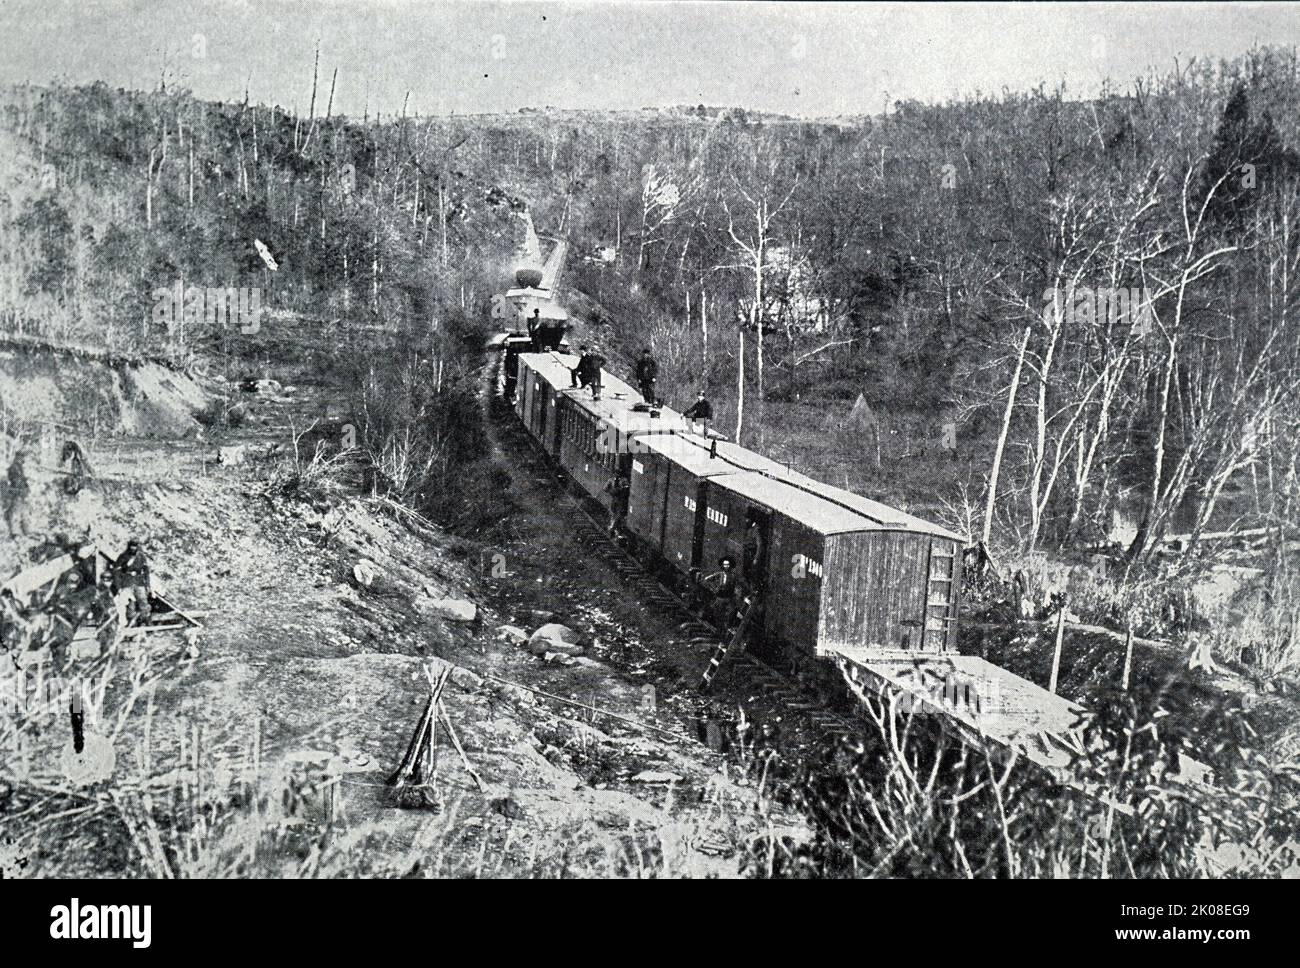 The Orange and Alexandria Railroad (O&A) was a railroad in Virginia, United States. Chartered in 1848, it eventually extended from Alexandria to Gordonsville, with another section from Charlottesville to Lynchburg. The road played a crucial role in the American Civil War. Black and white photograph Stock Photo